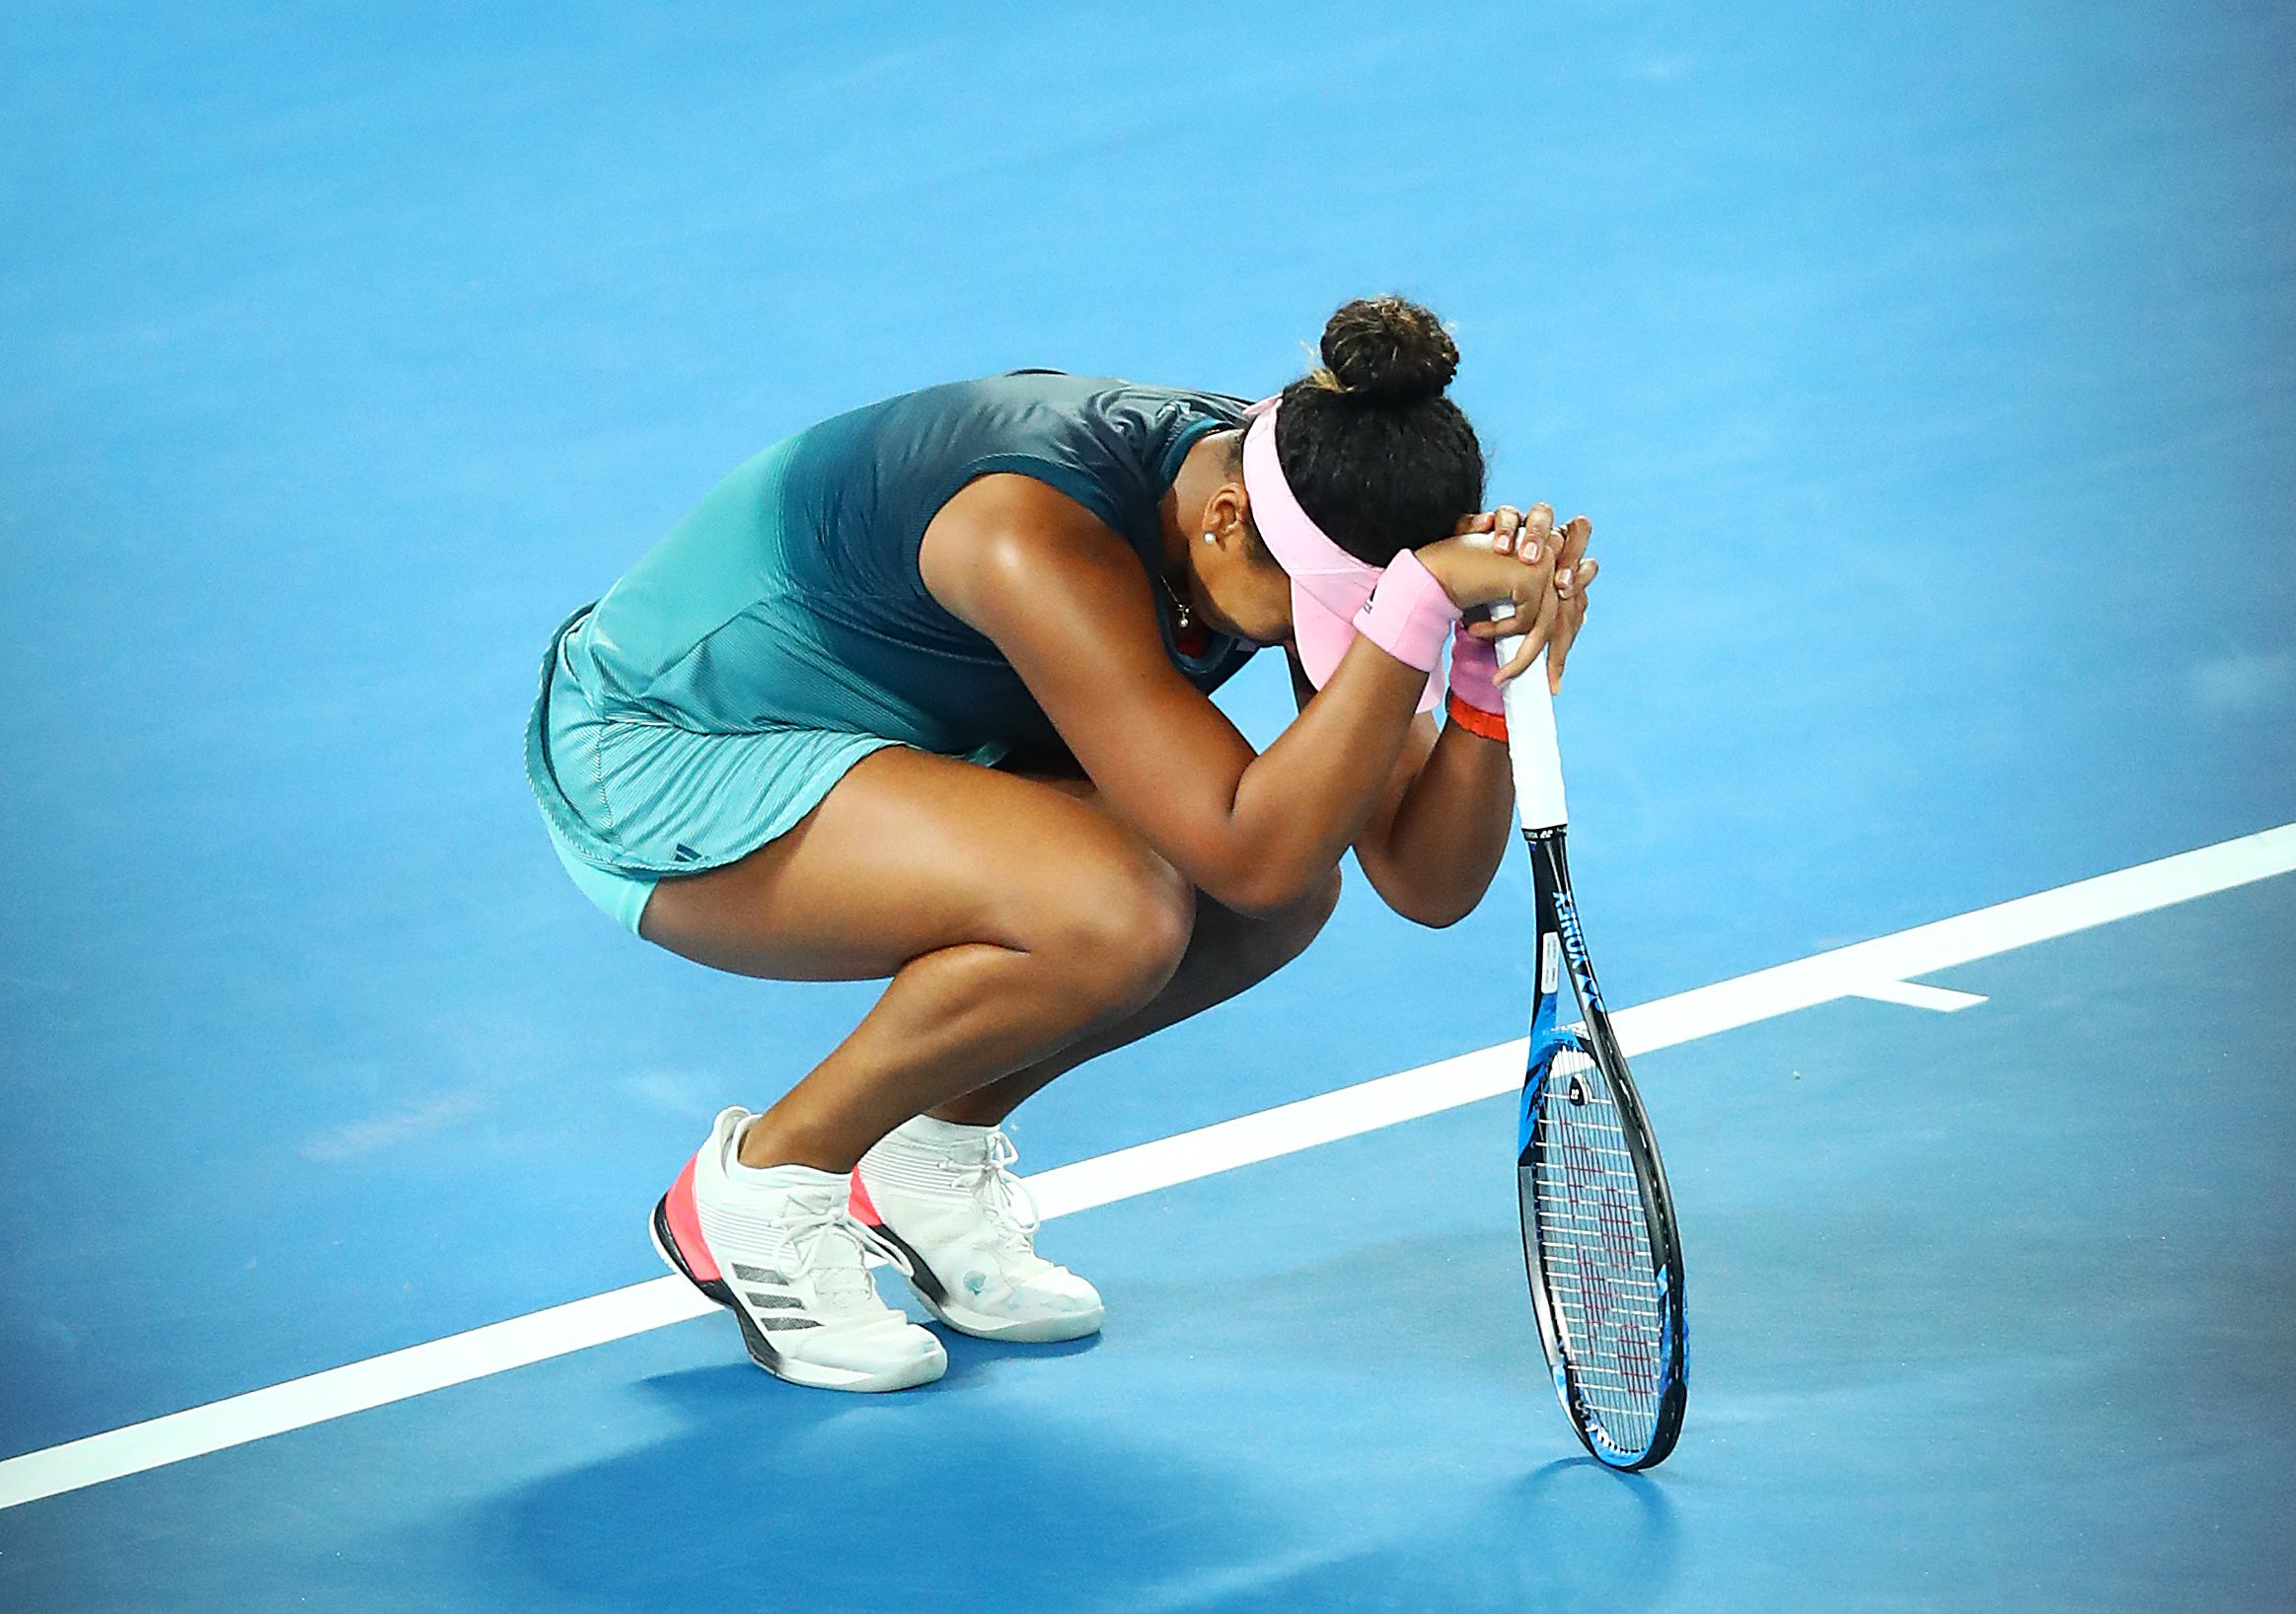 Naomi Osaka of Japan takes part in a lap of honor with Daphne Akhurst at the 2019 Australian Open on January 26, 2019 in Melbourne. | Photo: Getty Images